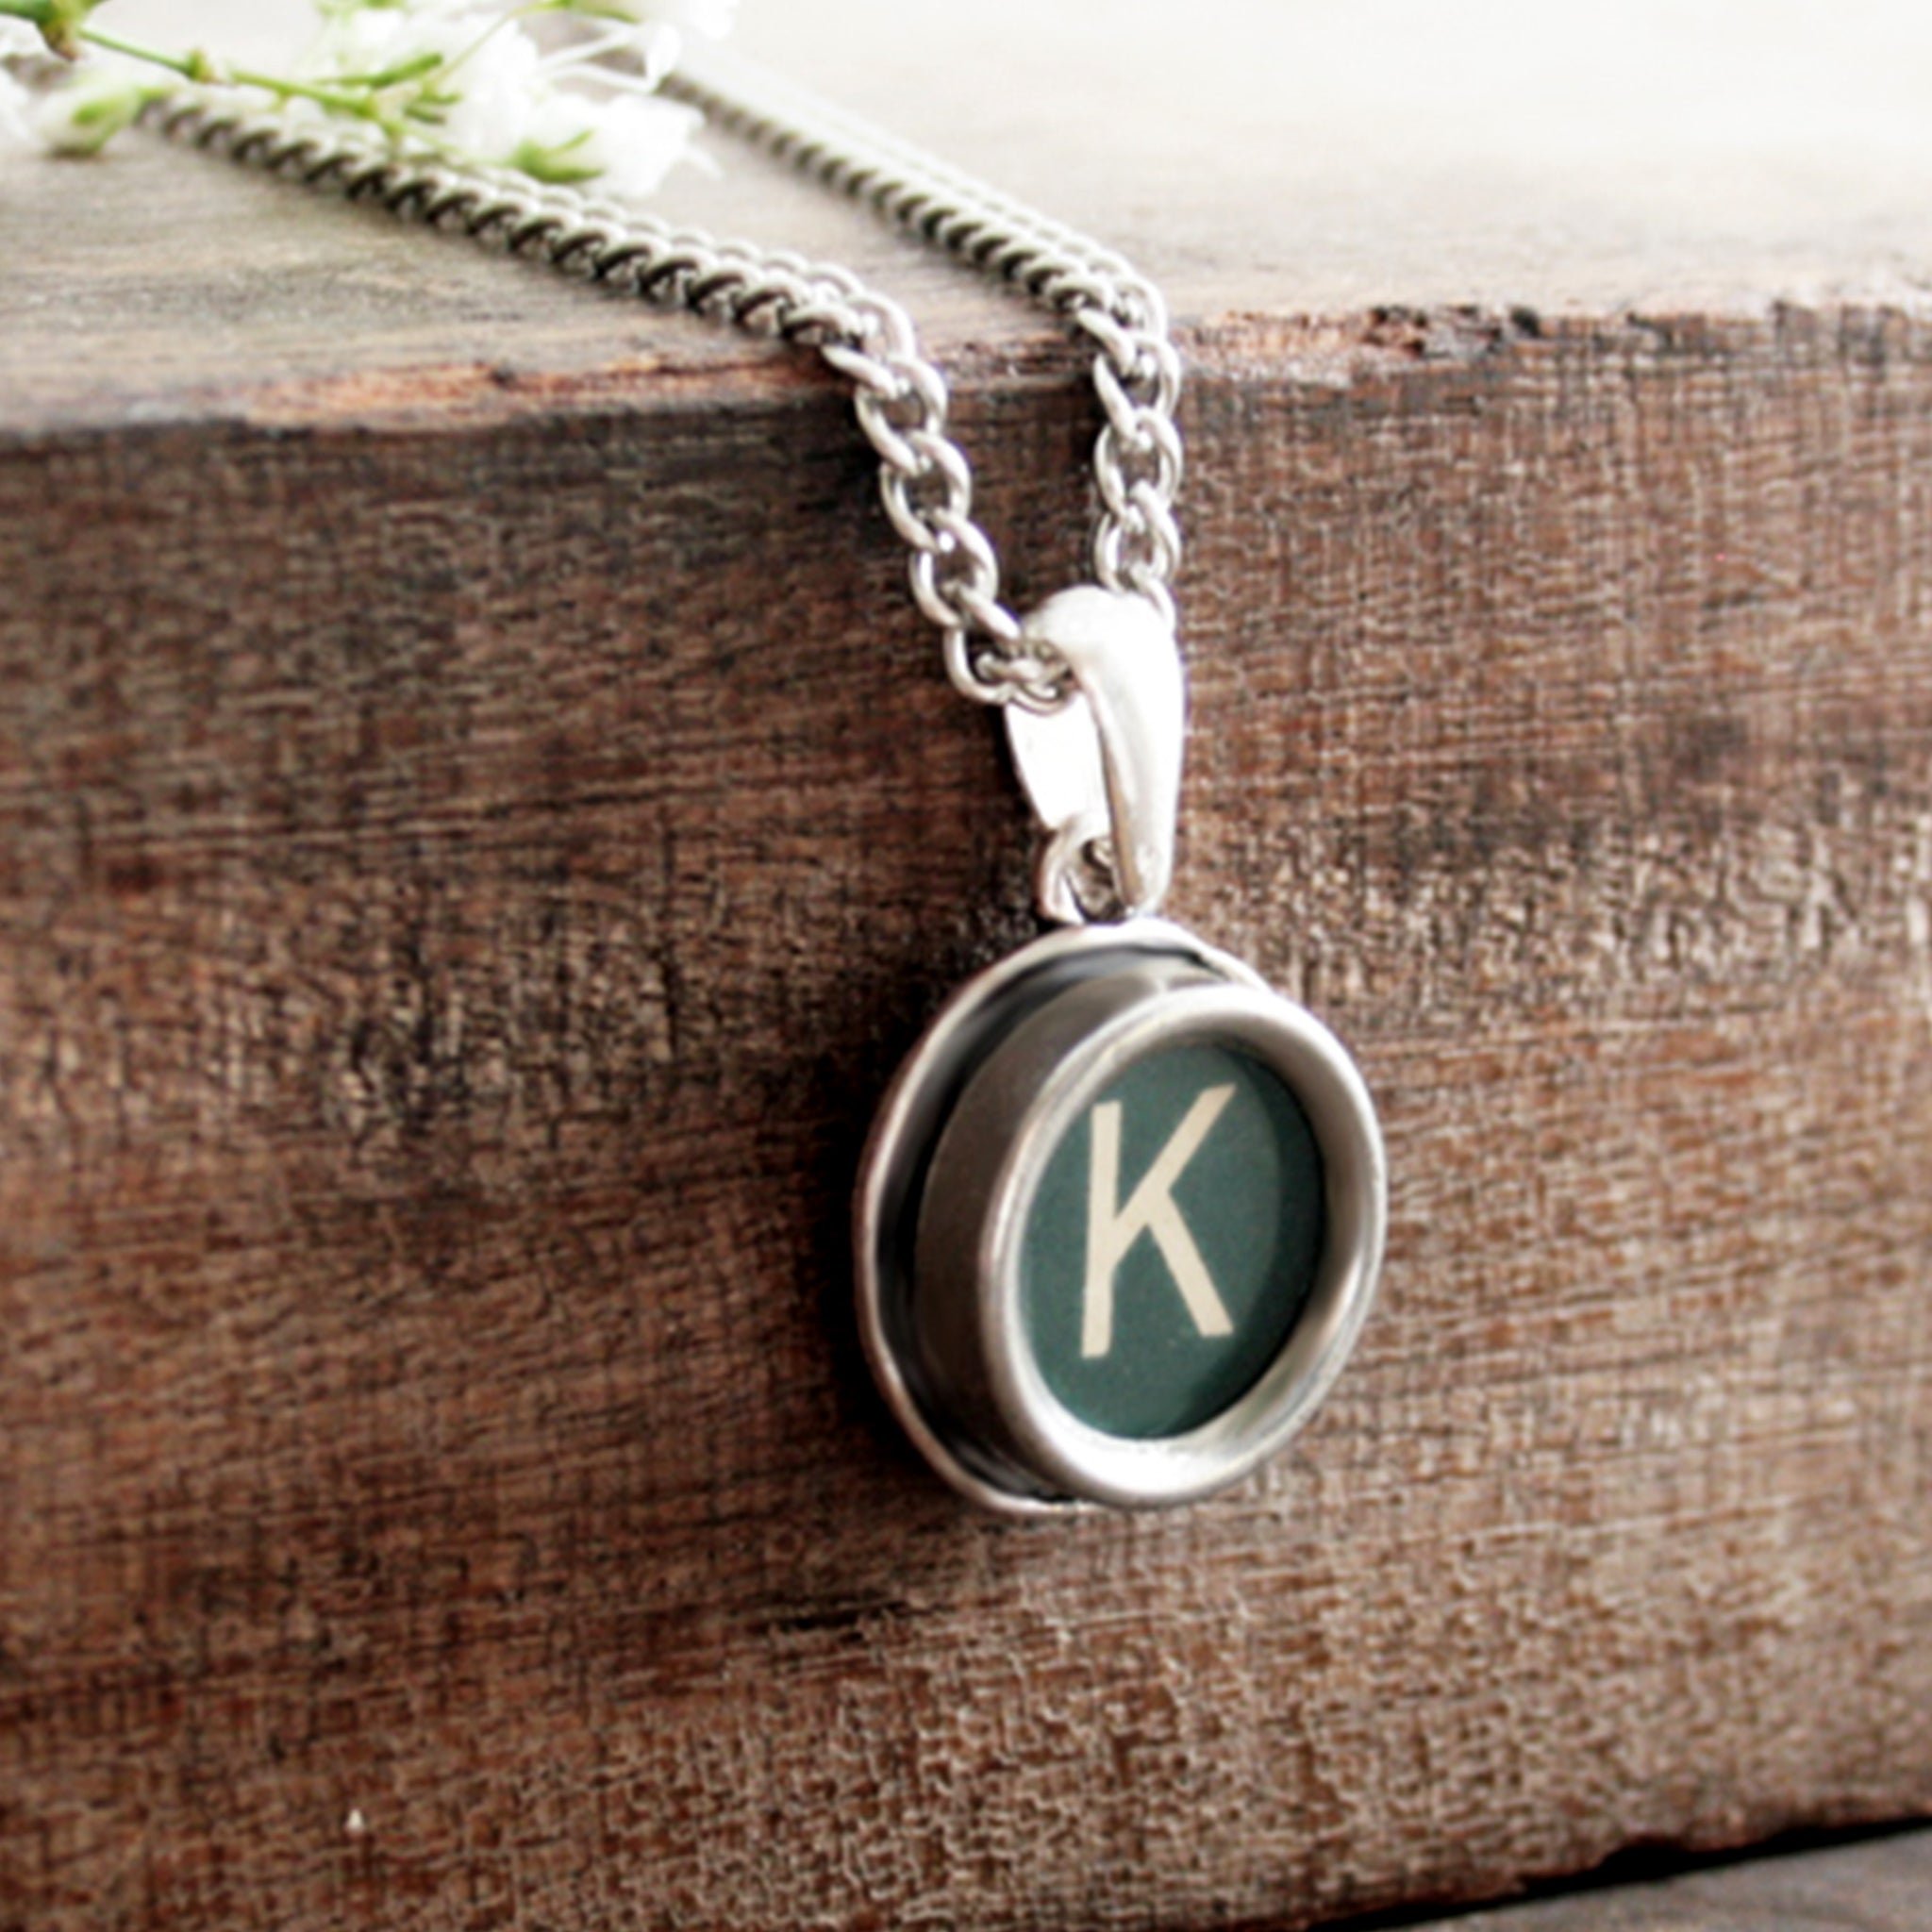 Green K letter necklace made of real typewriter key